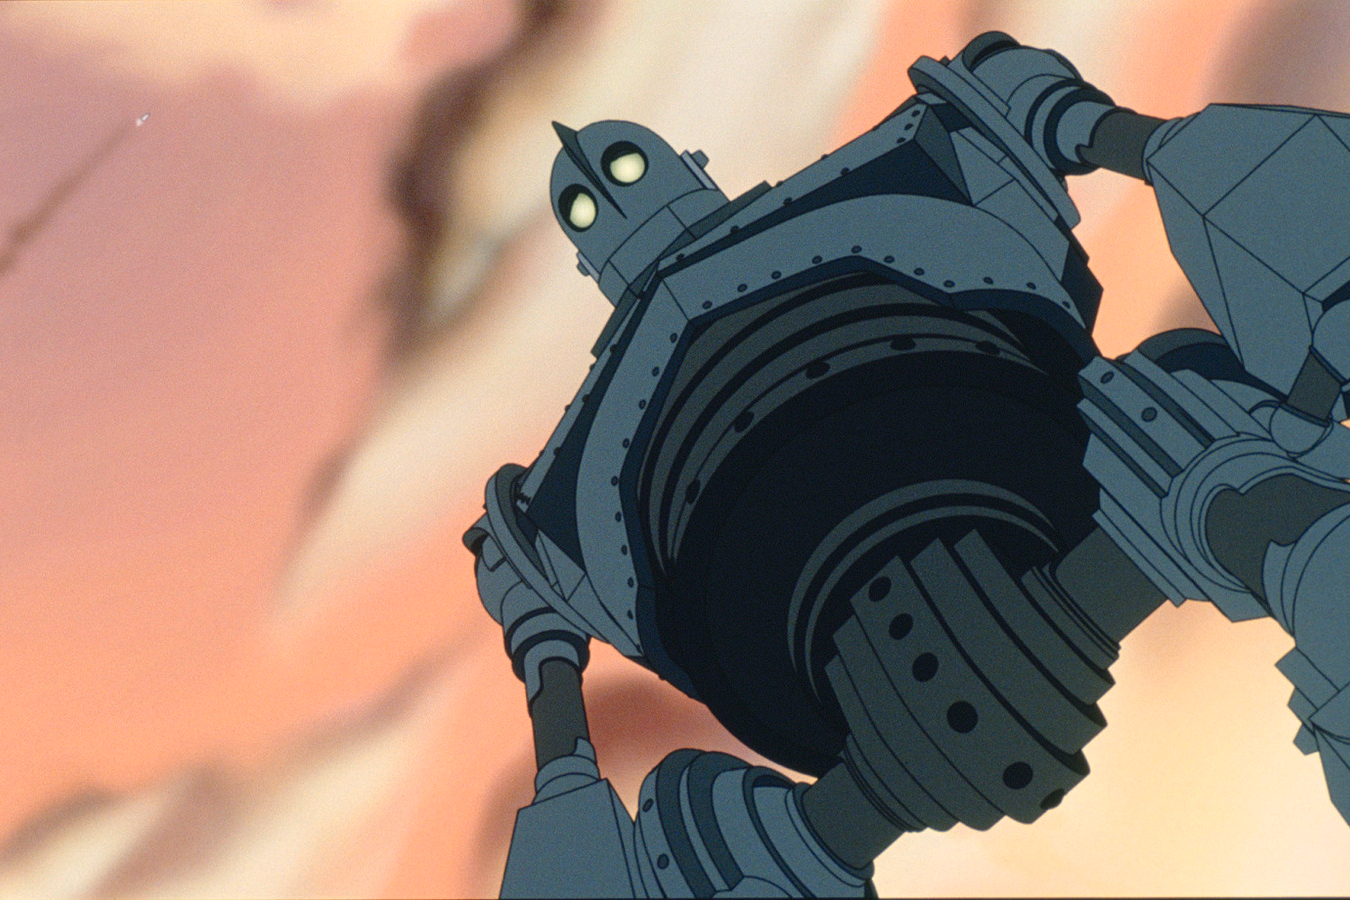 A nuclear missile soars into the air above the Iron Giant.